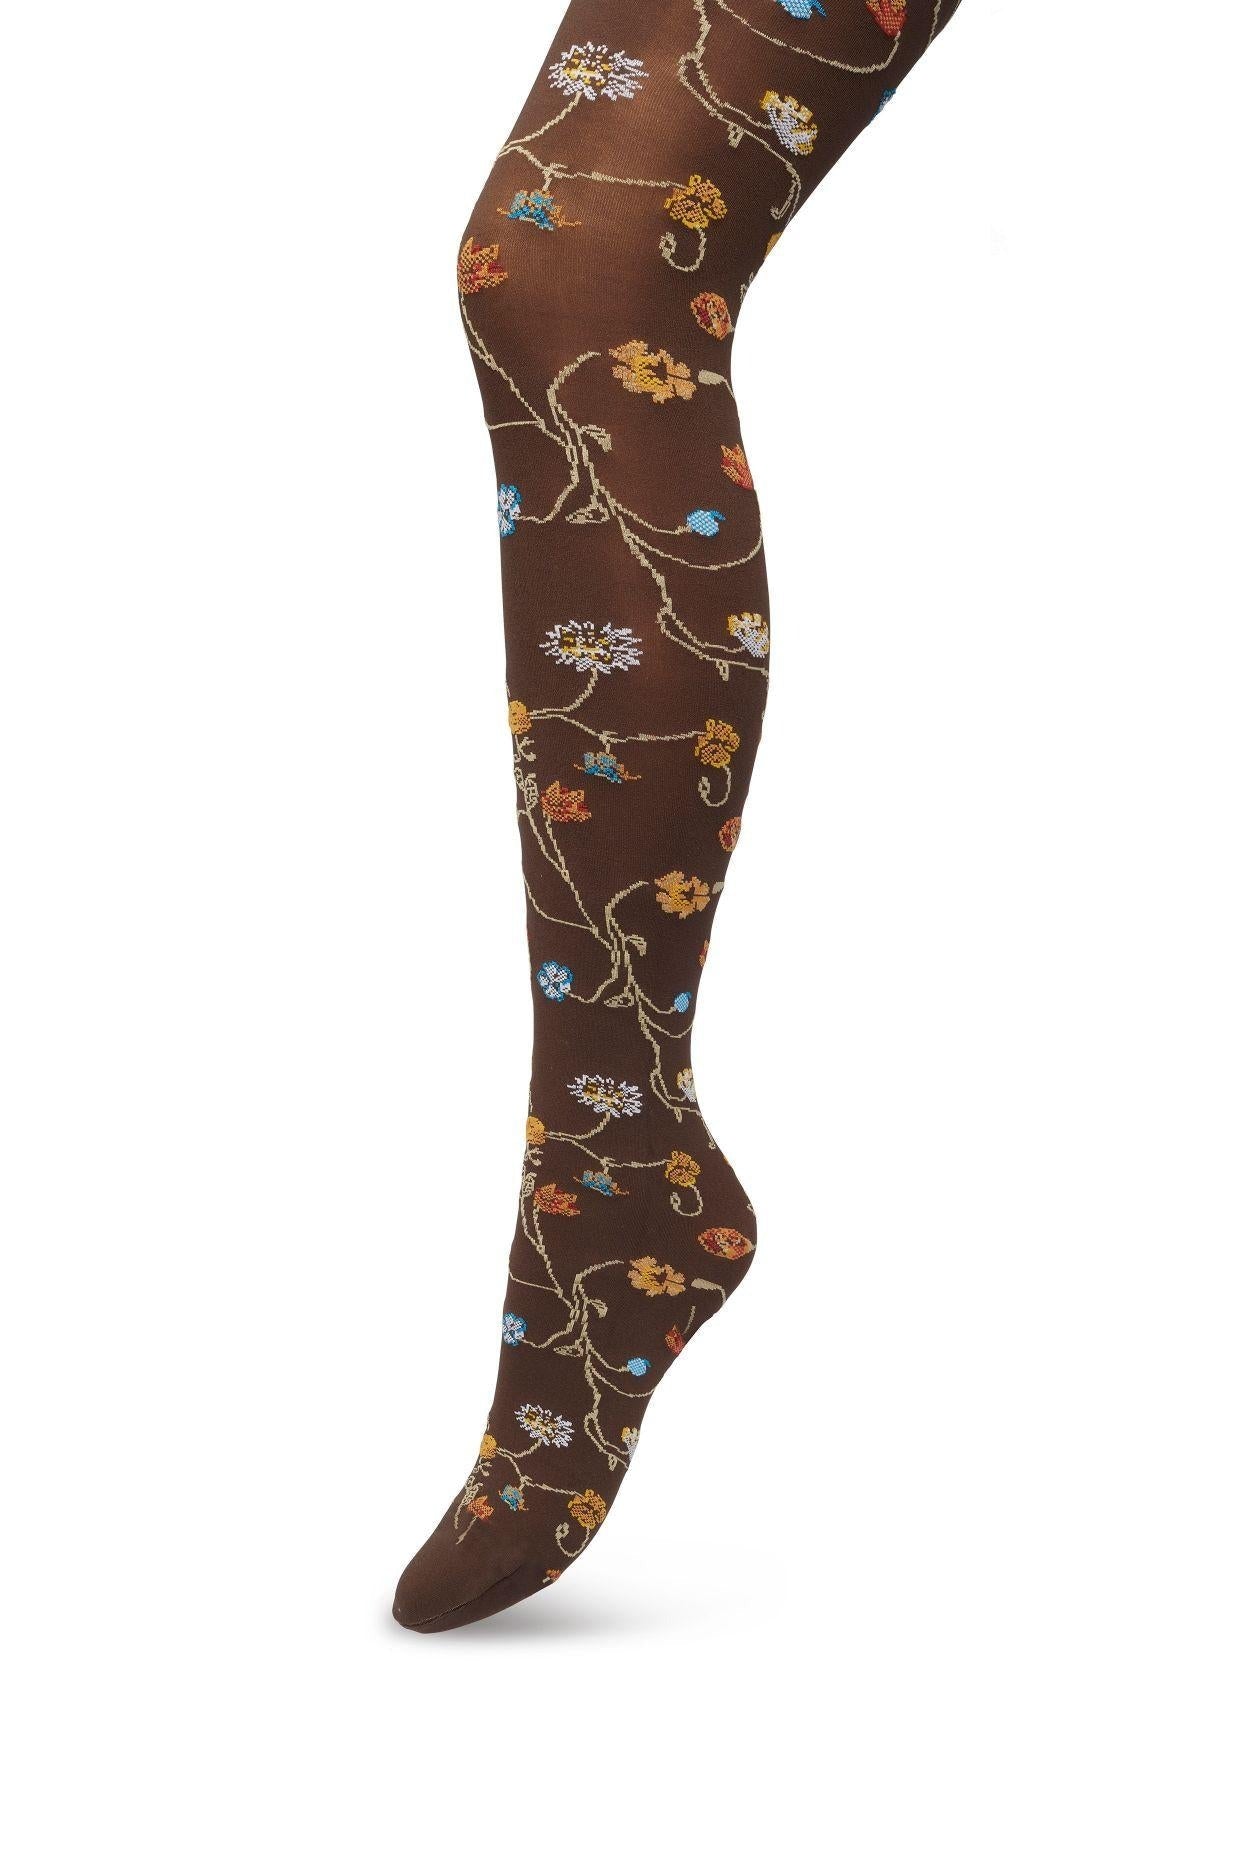 Bonnie Doon Floral Tights - Soft brown opaque fashion tights with a multicoloured woven floral pattern